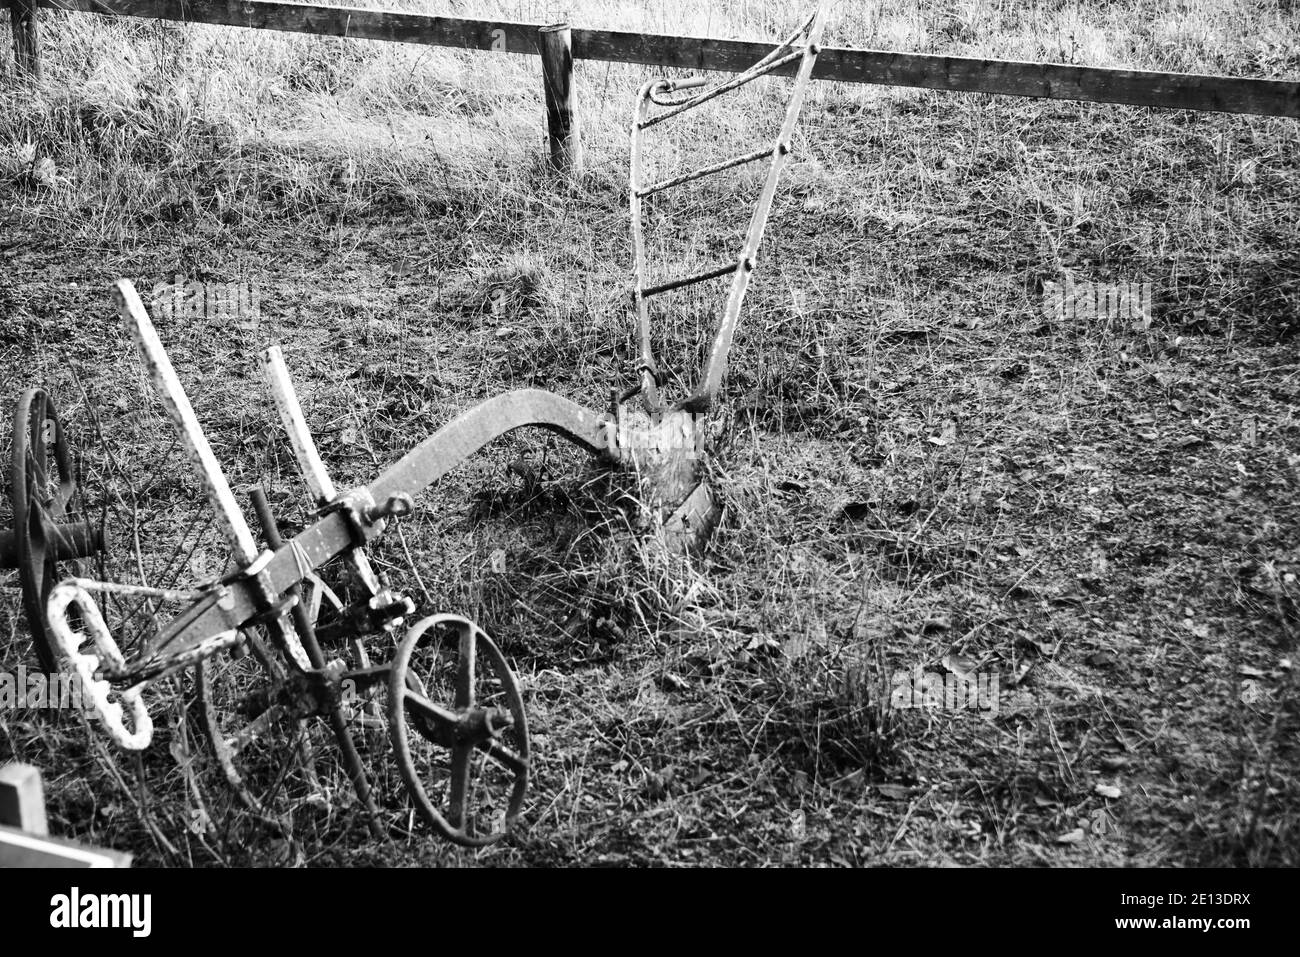 Old farming machinery in field, old horse plough black & white image Stock Photo